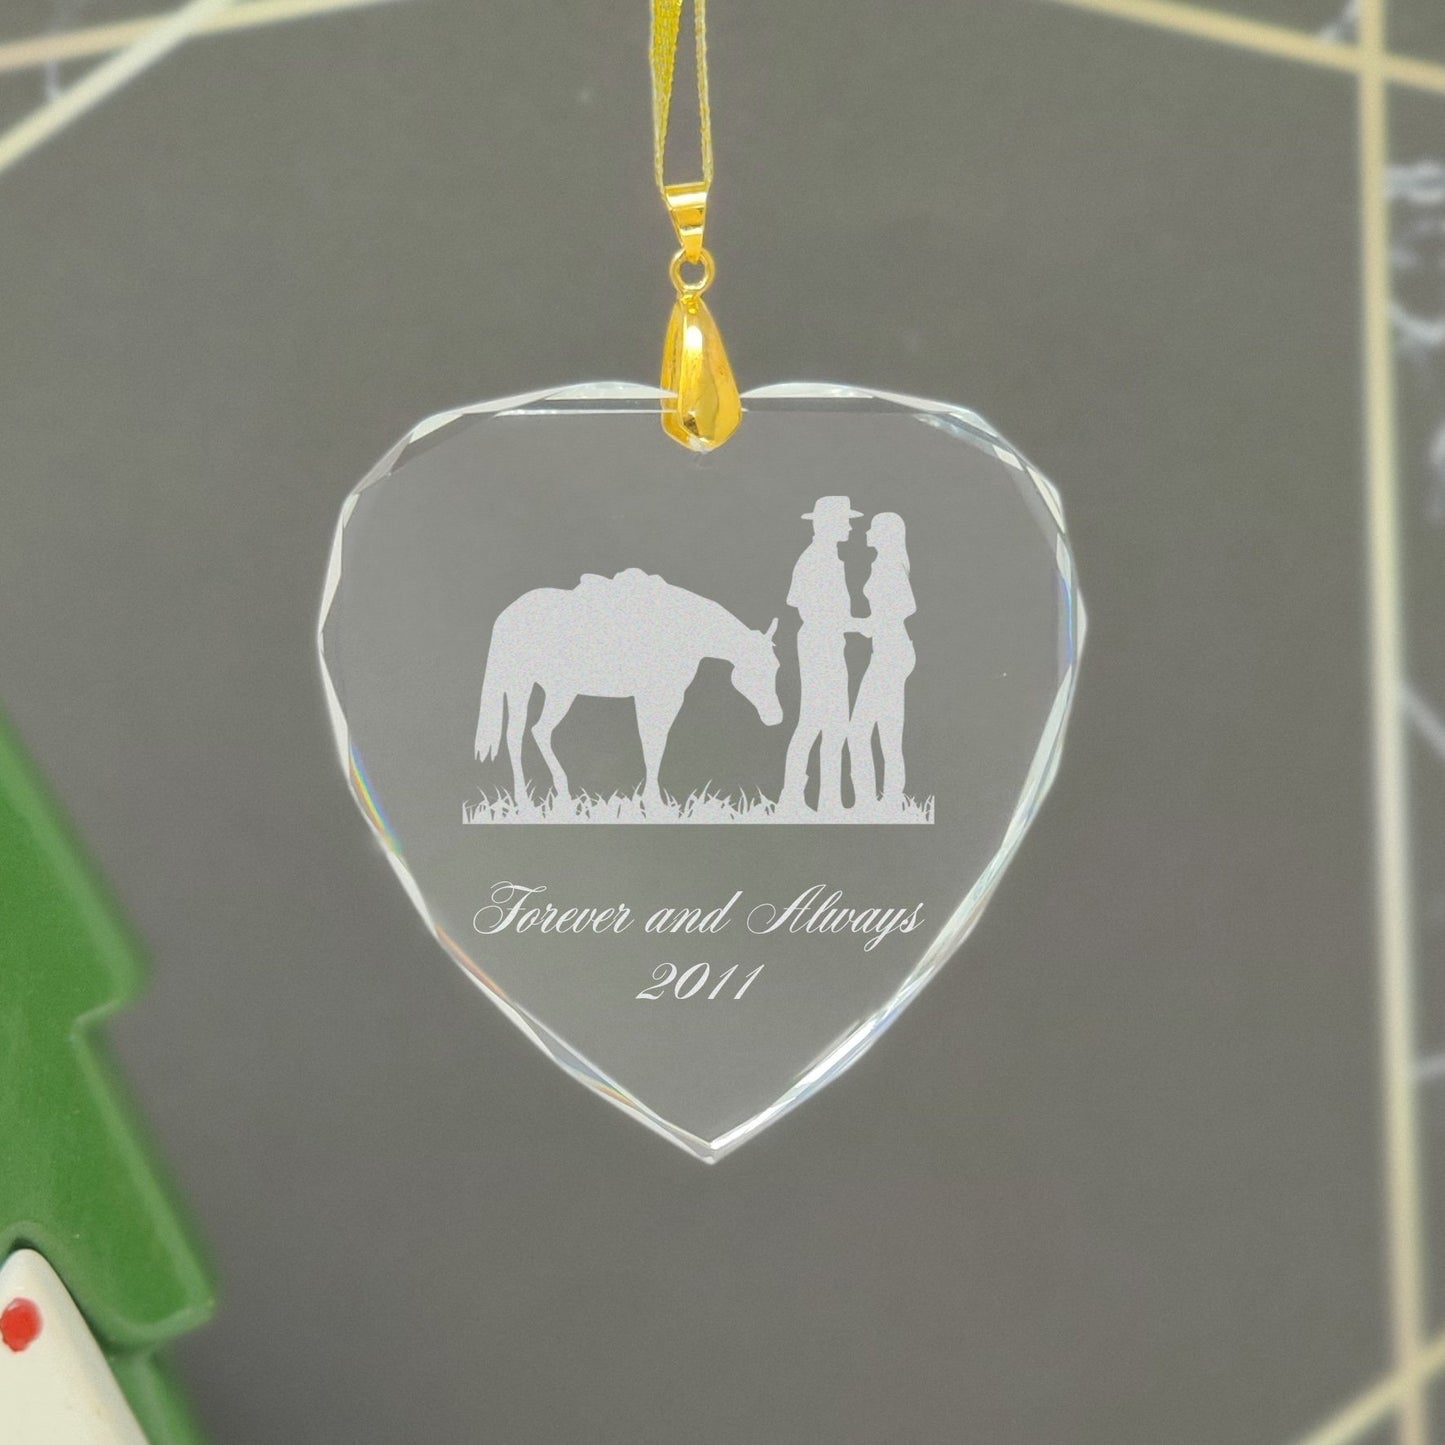 LaserGram Christmas Ornament, RD Registered Dietitian, Personalized Engraving Included (Heart Shape)